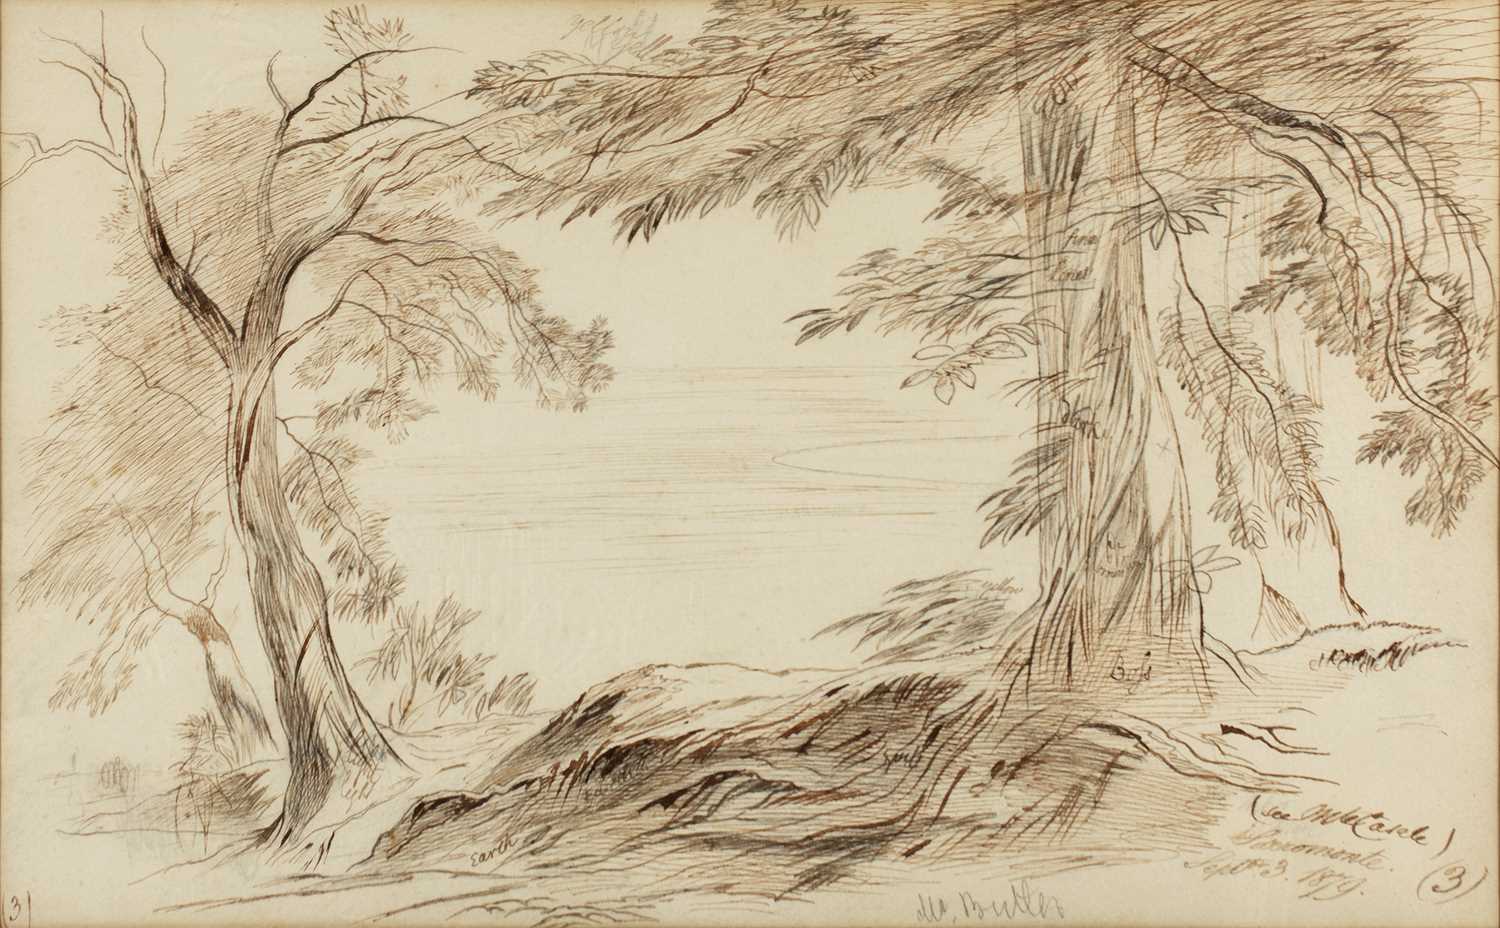 Edward Lear (1812-1888) Monte Casale Sacromonte 1879, numbered 3, pen and inks, 32 x 49cm